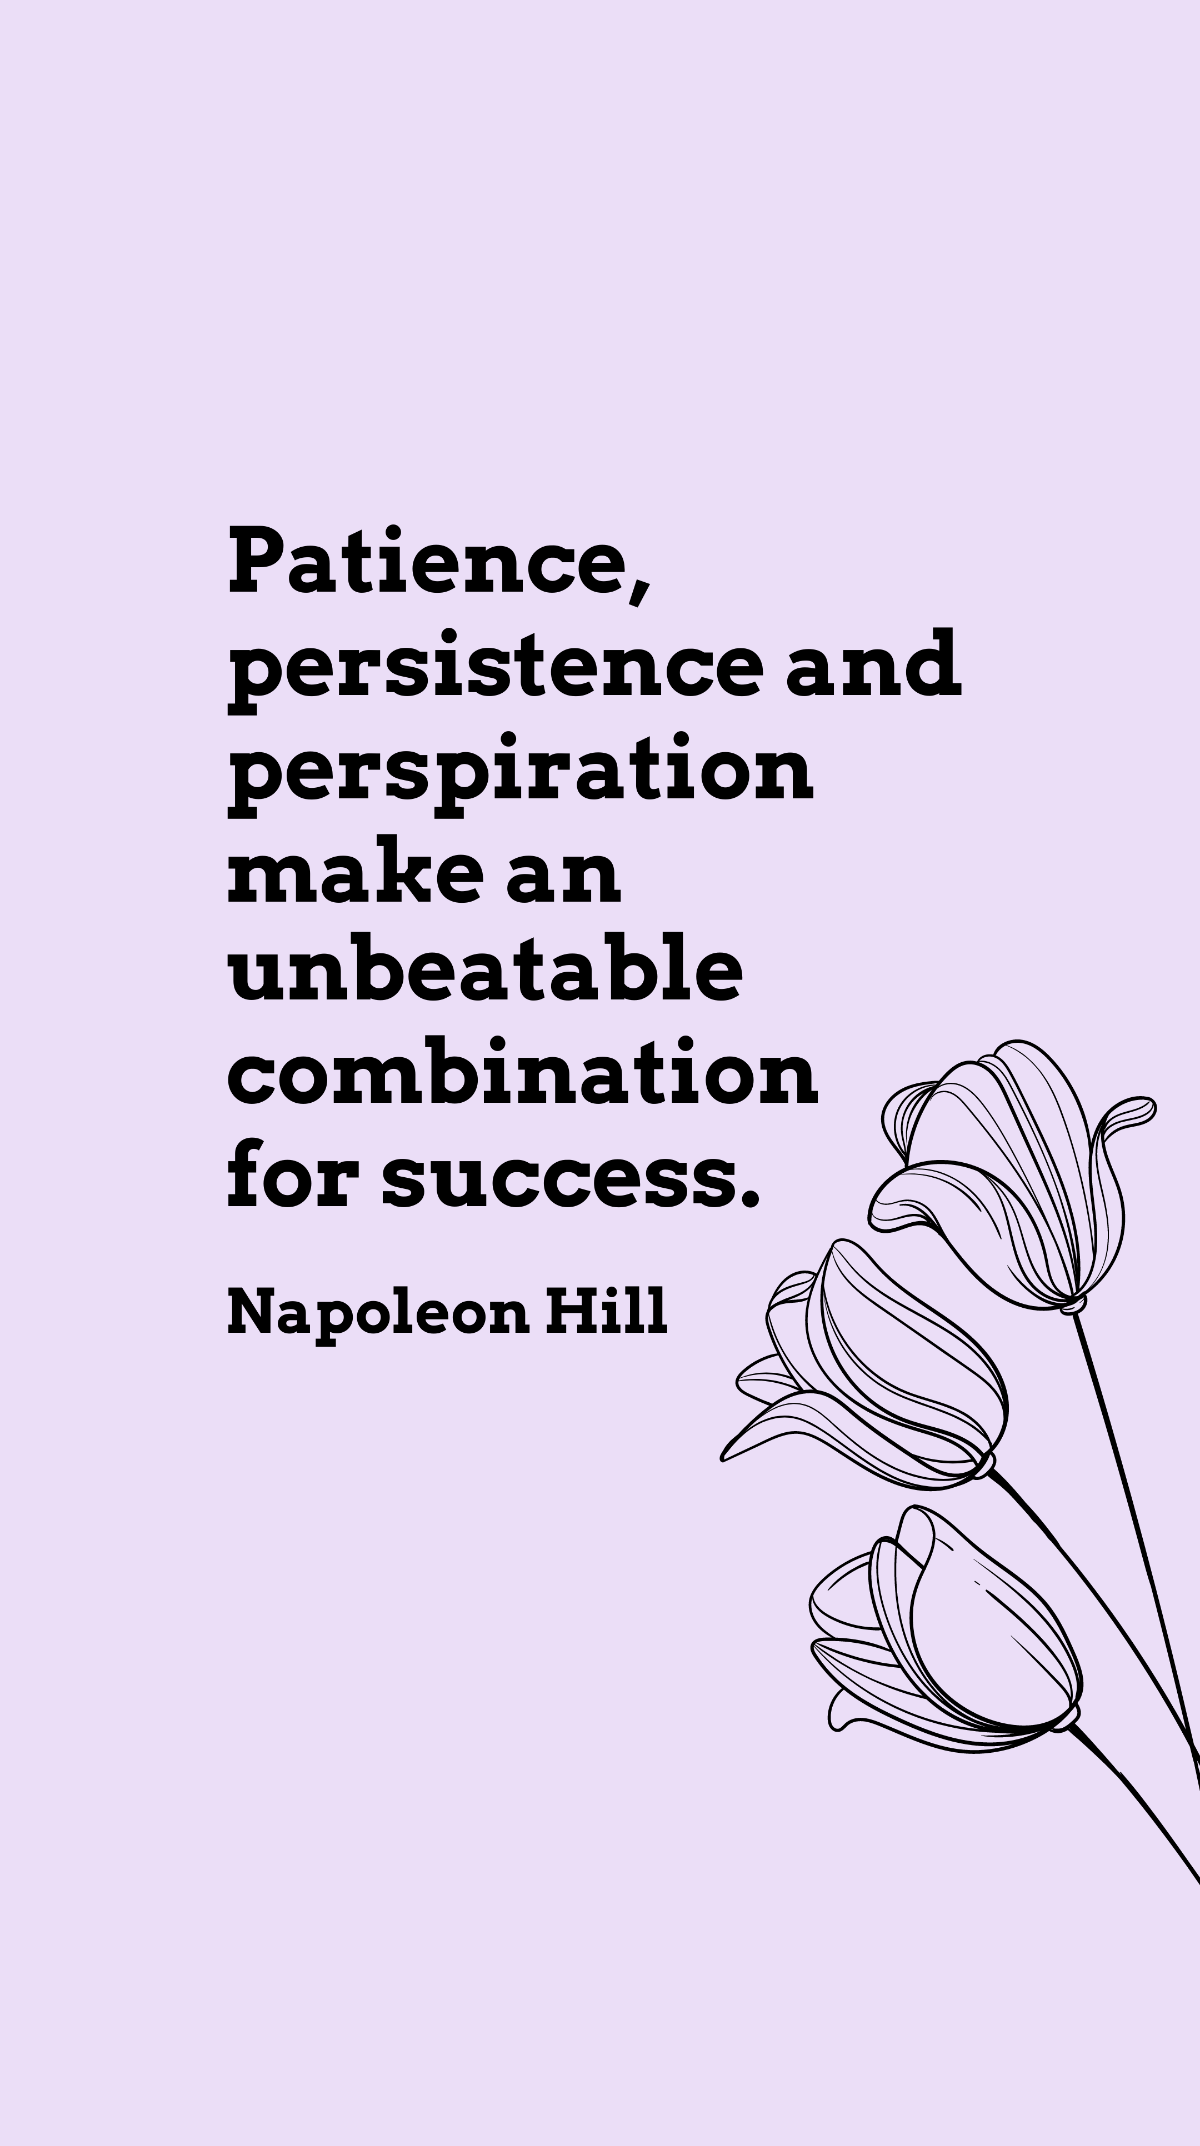 Free Napoleon Hill - Patience, persistence and perspiration make an unbeatable combination for success. Template